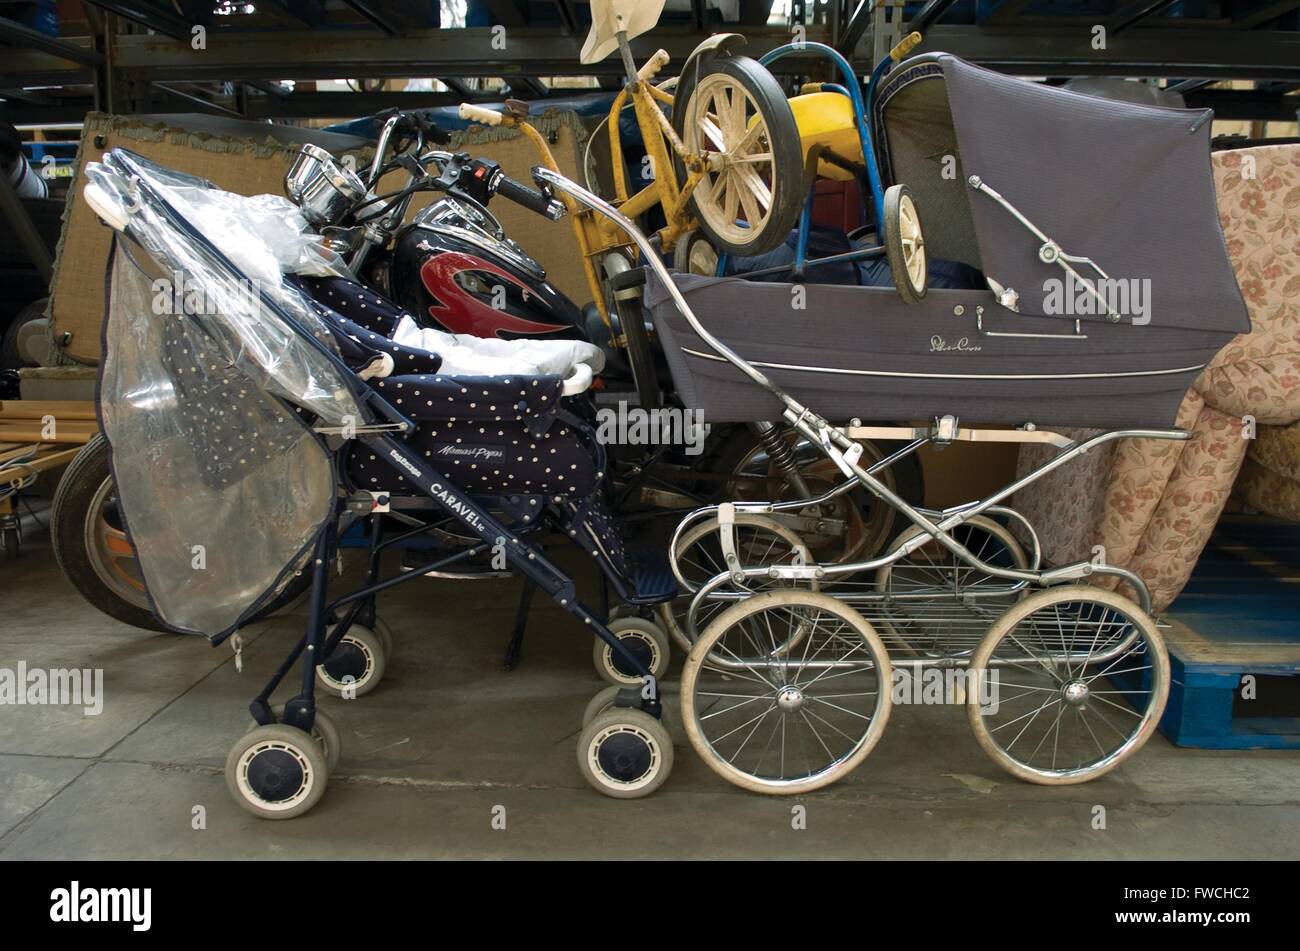 prams and pushchairs